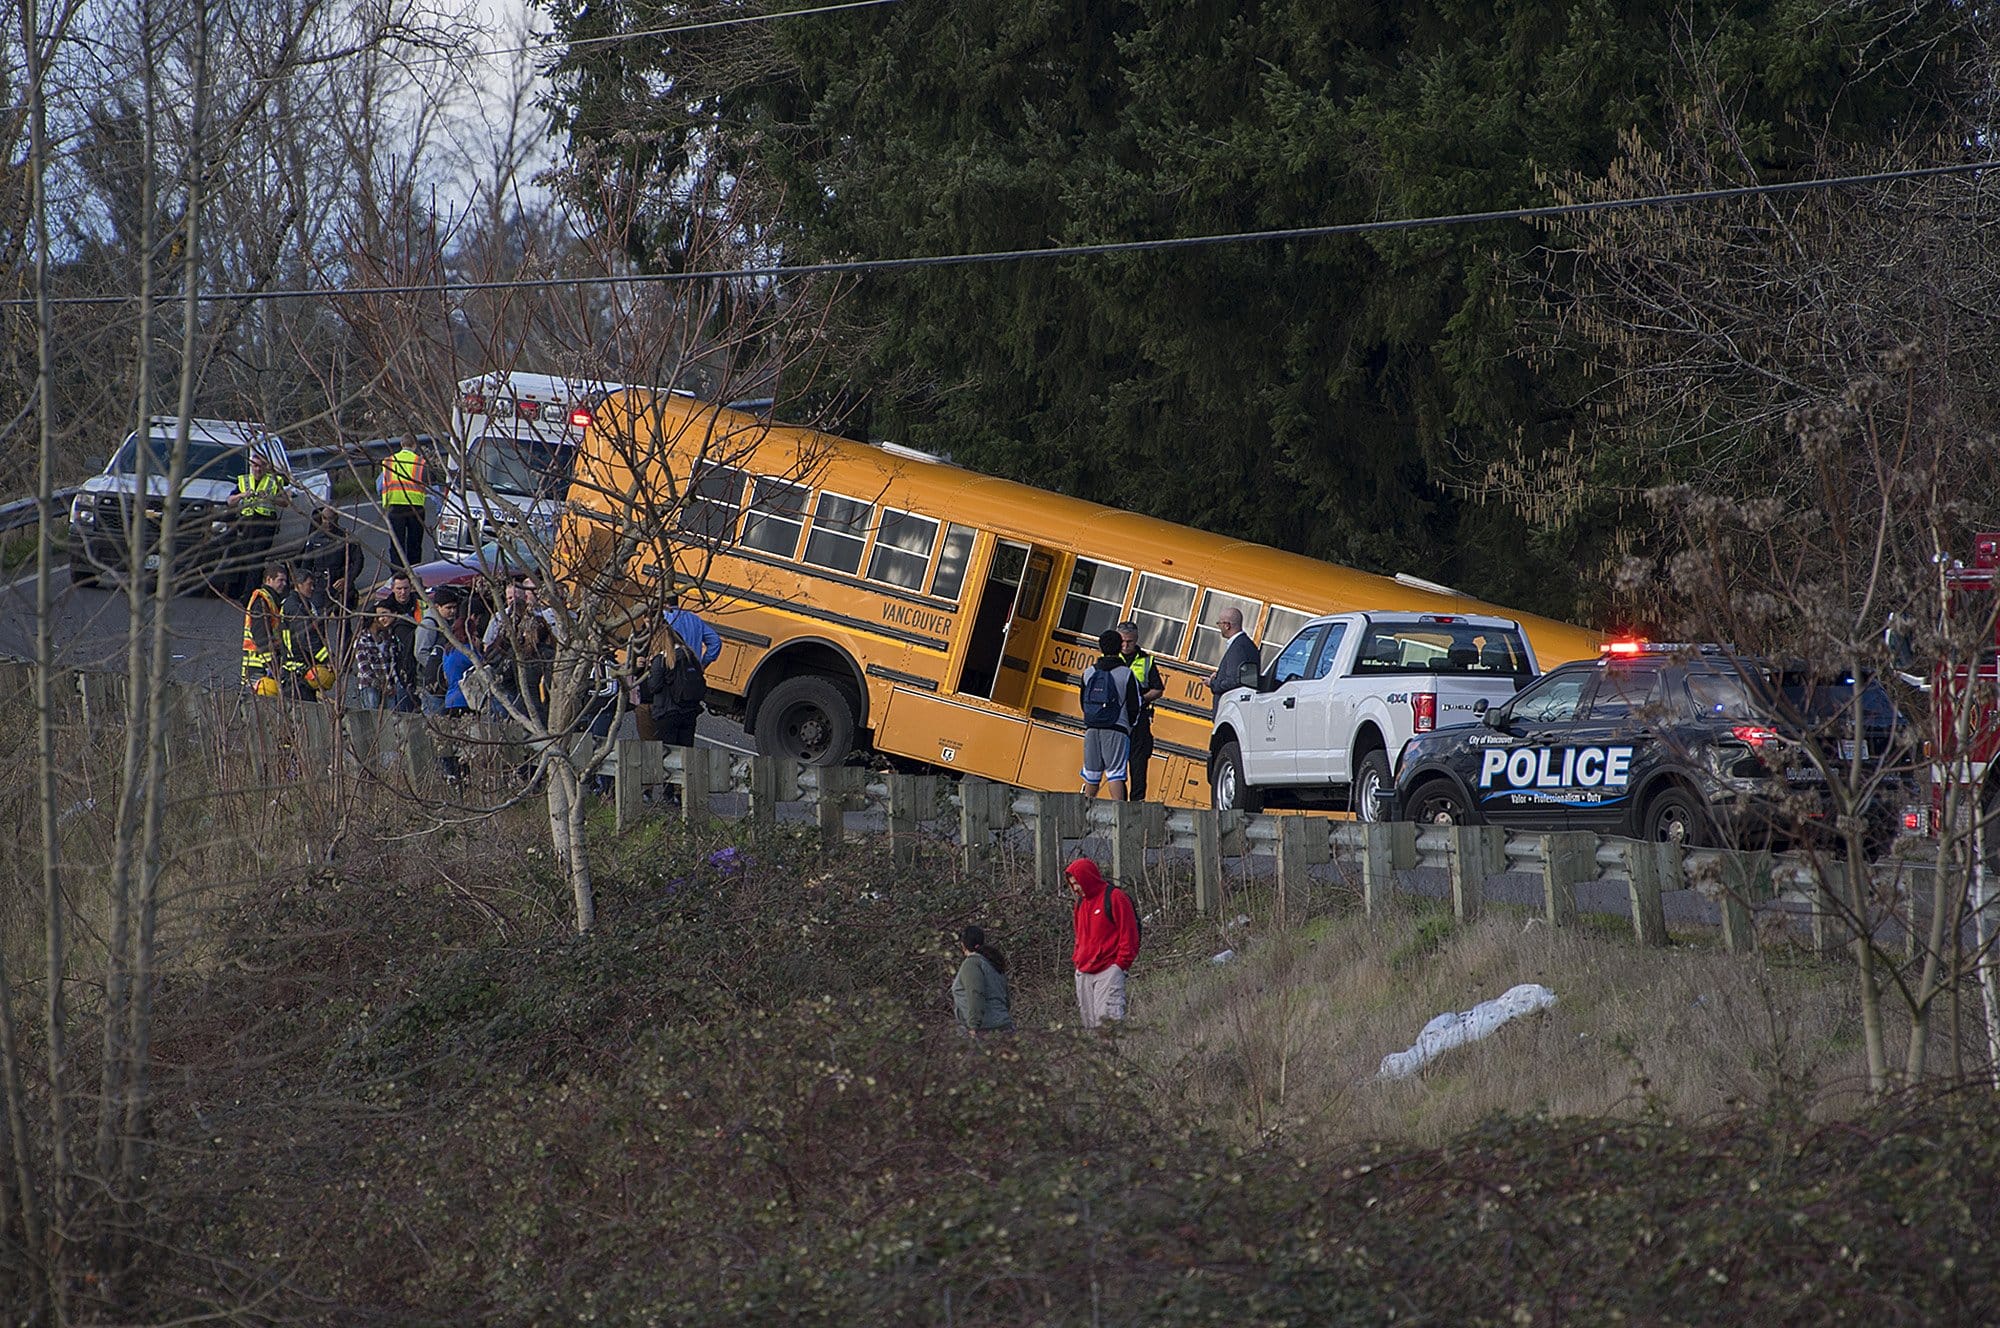 A school bus went over embankment on Fruit Valley Road with kids on board. No injuries were reported. Traffic is routed around scene.